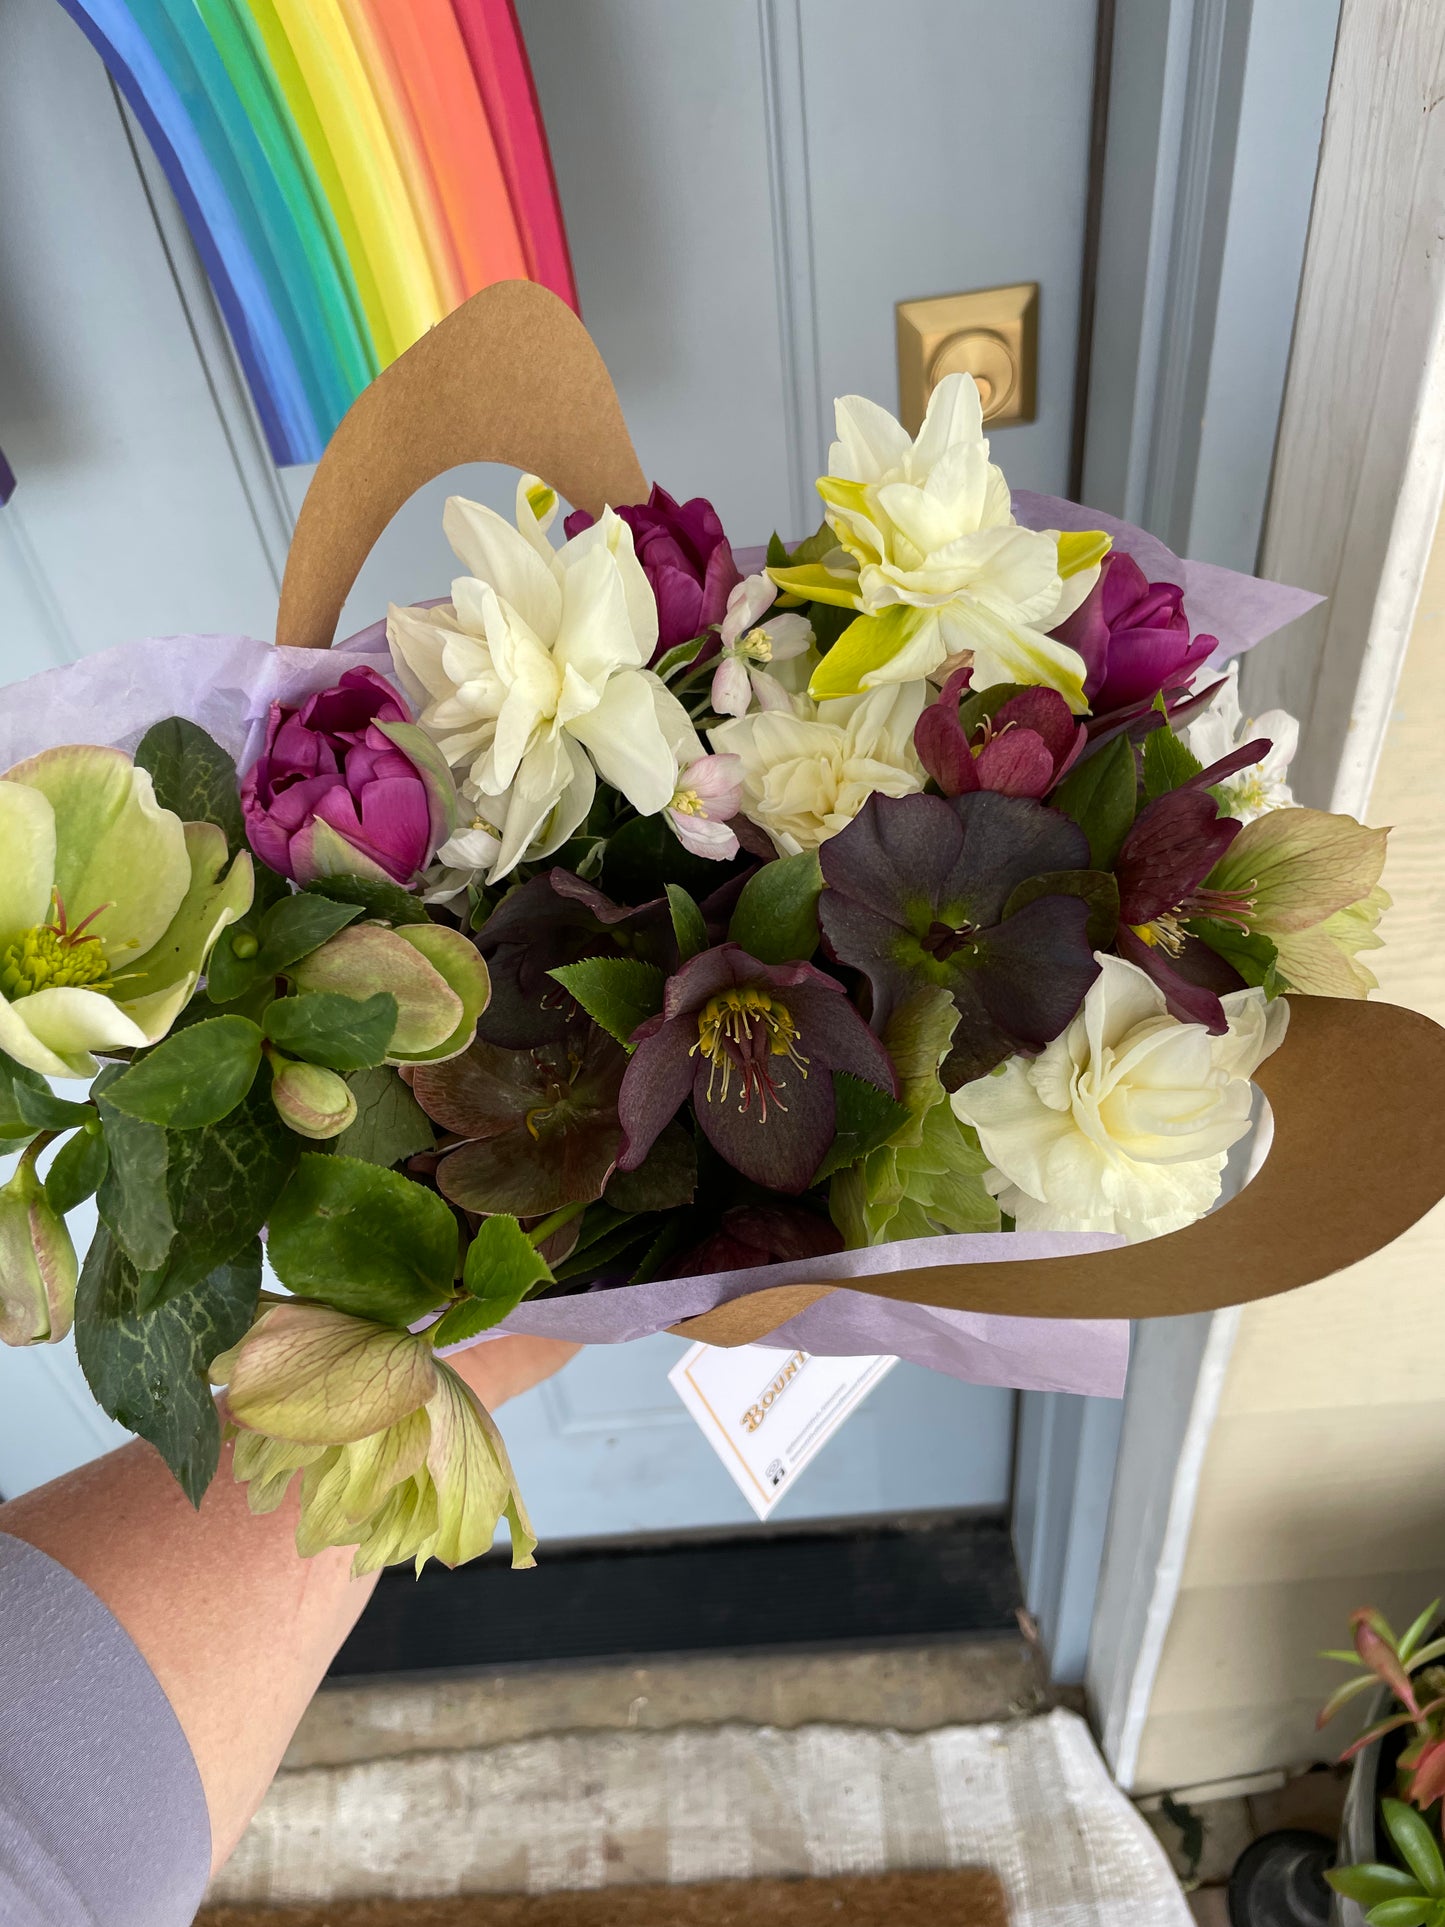 Friday Flowers! - Our freshest blooms delivered!